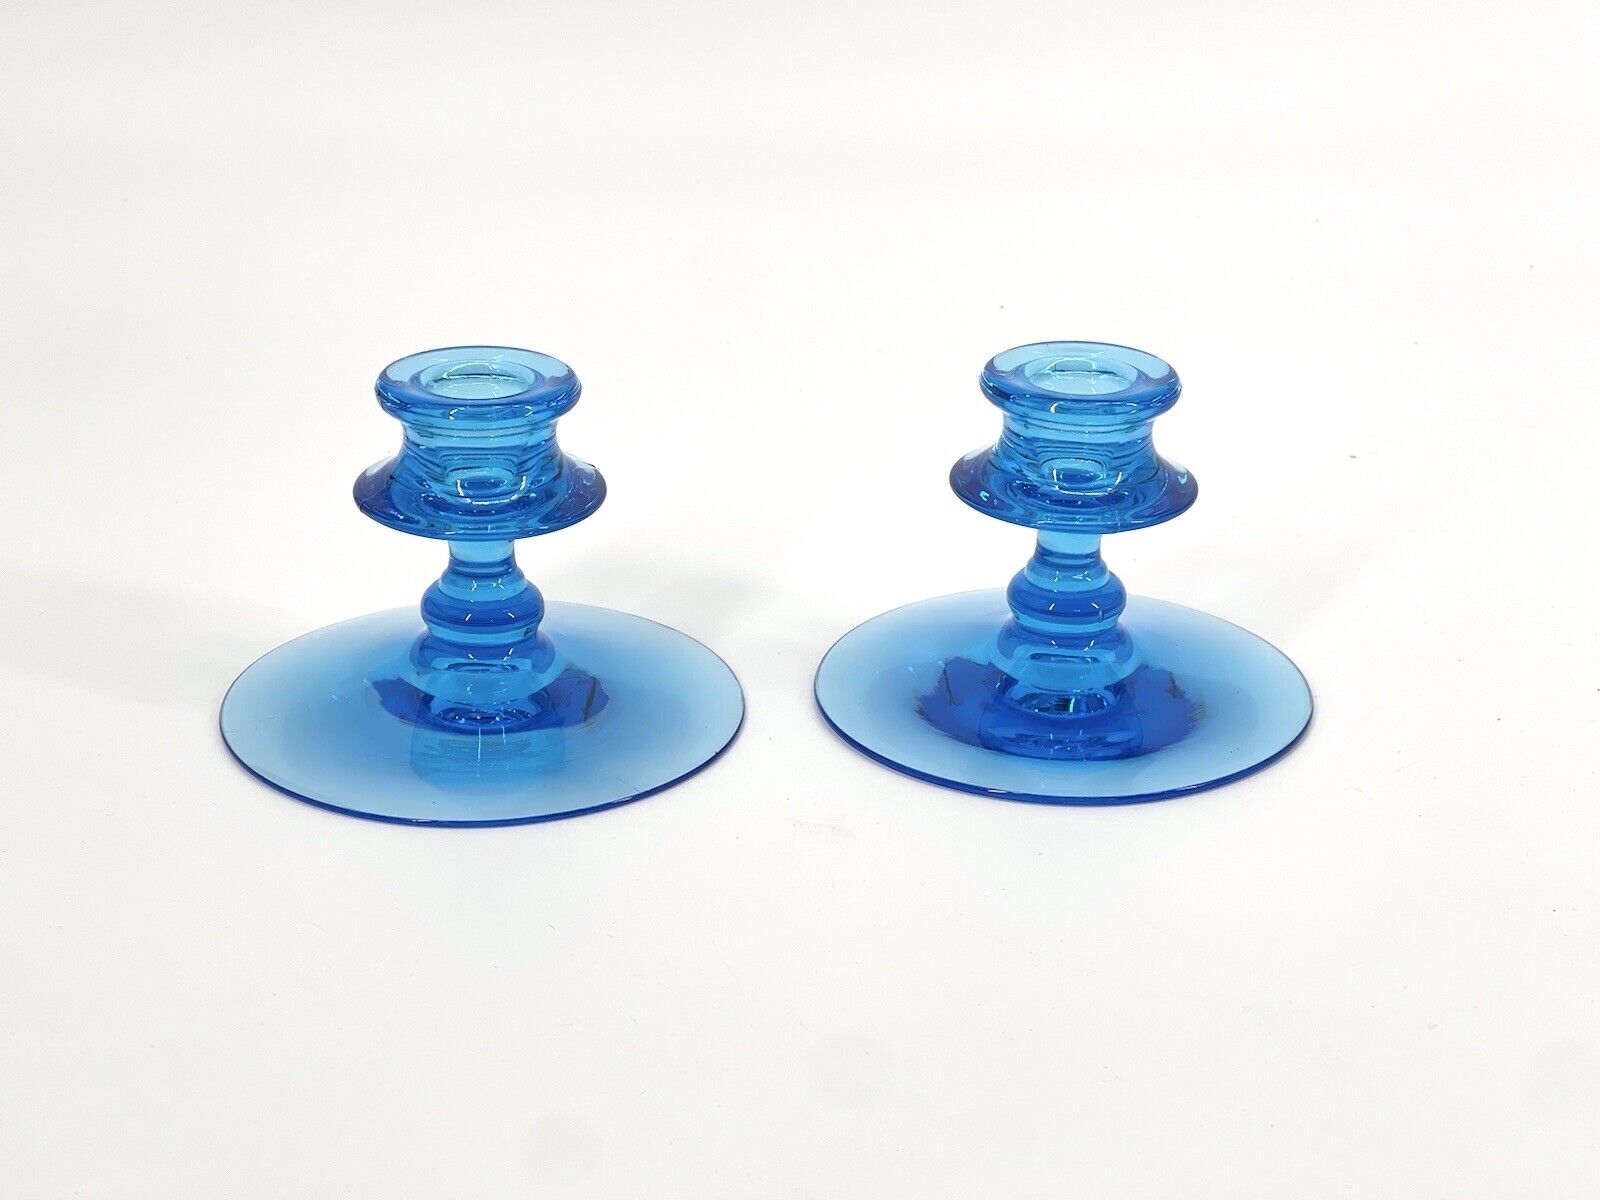 Vintage Fostoria Glass Candlesticks Candle Holders 1920s Electric Blue Pair (2)